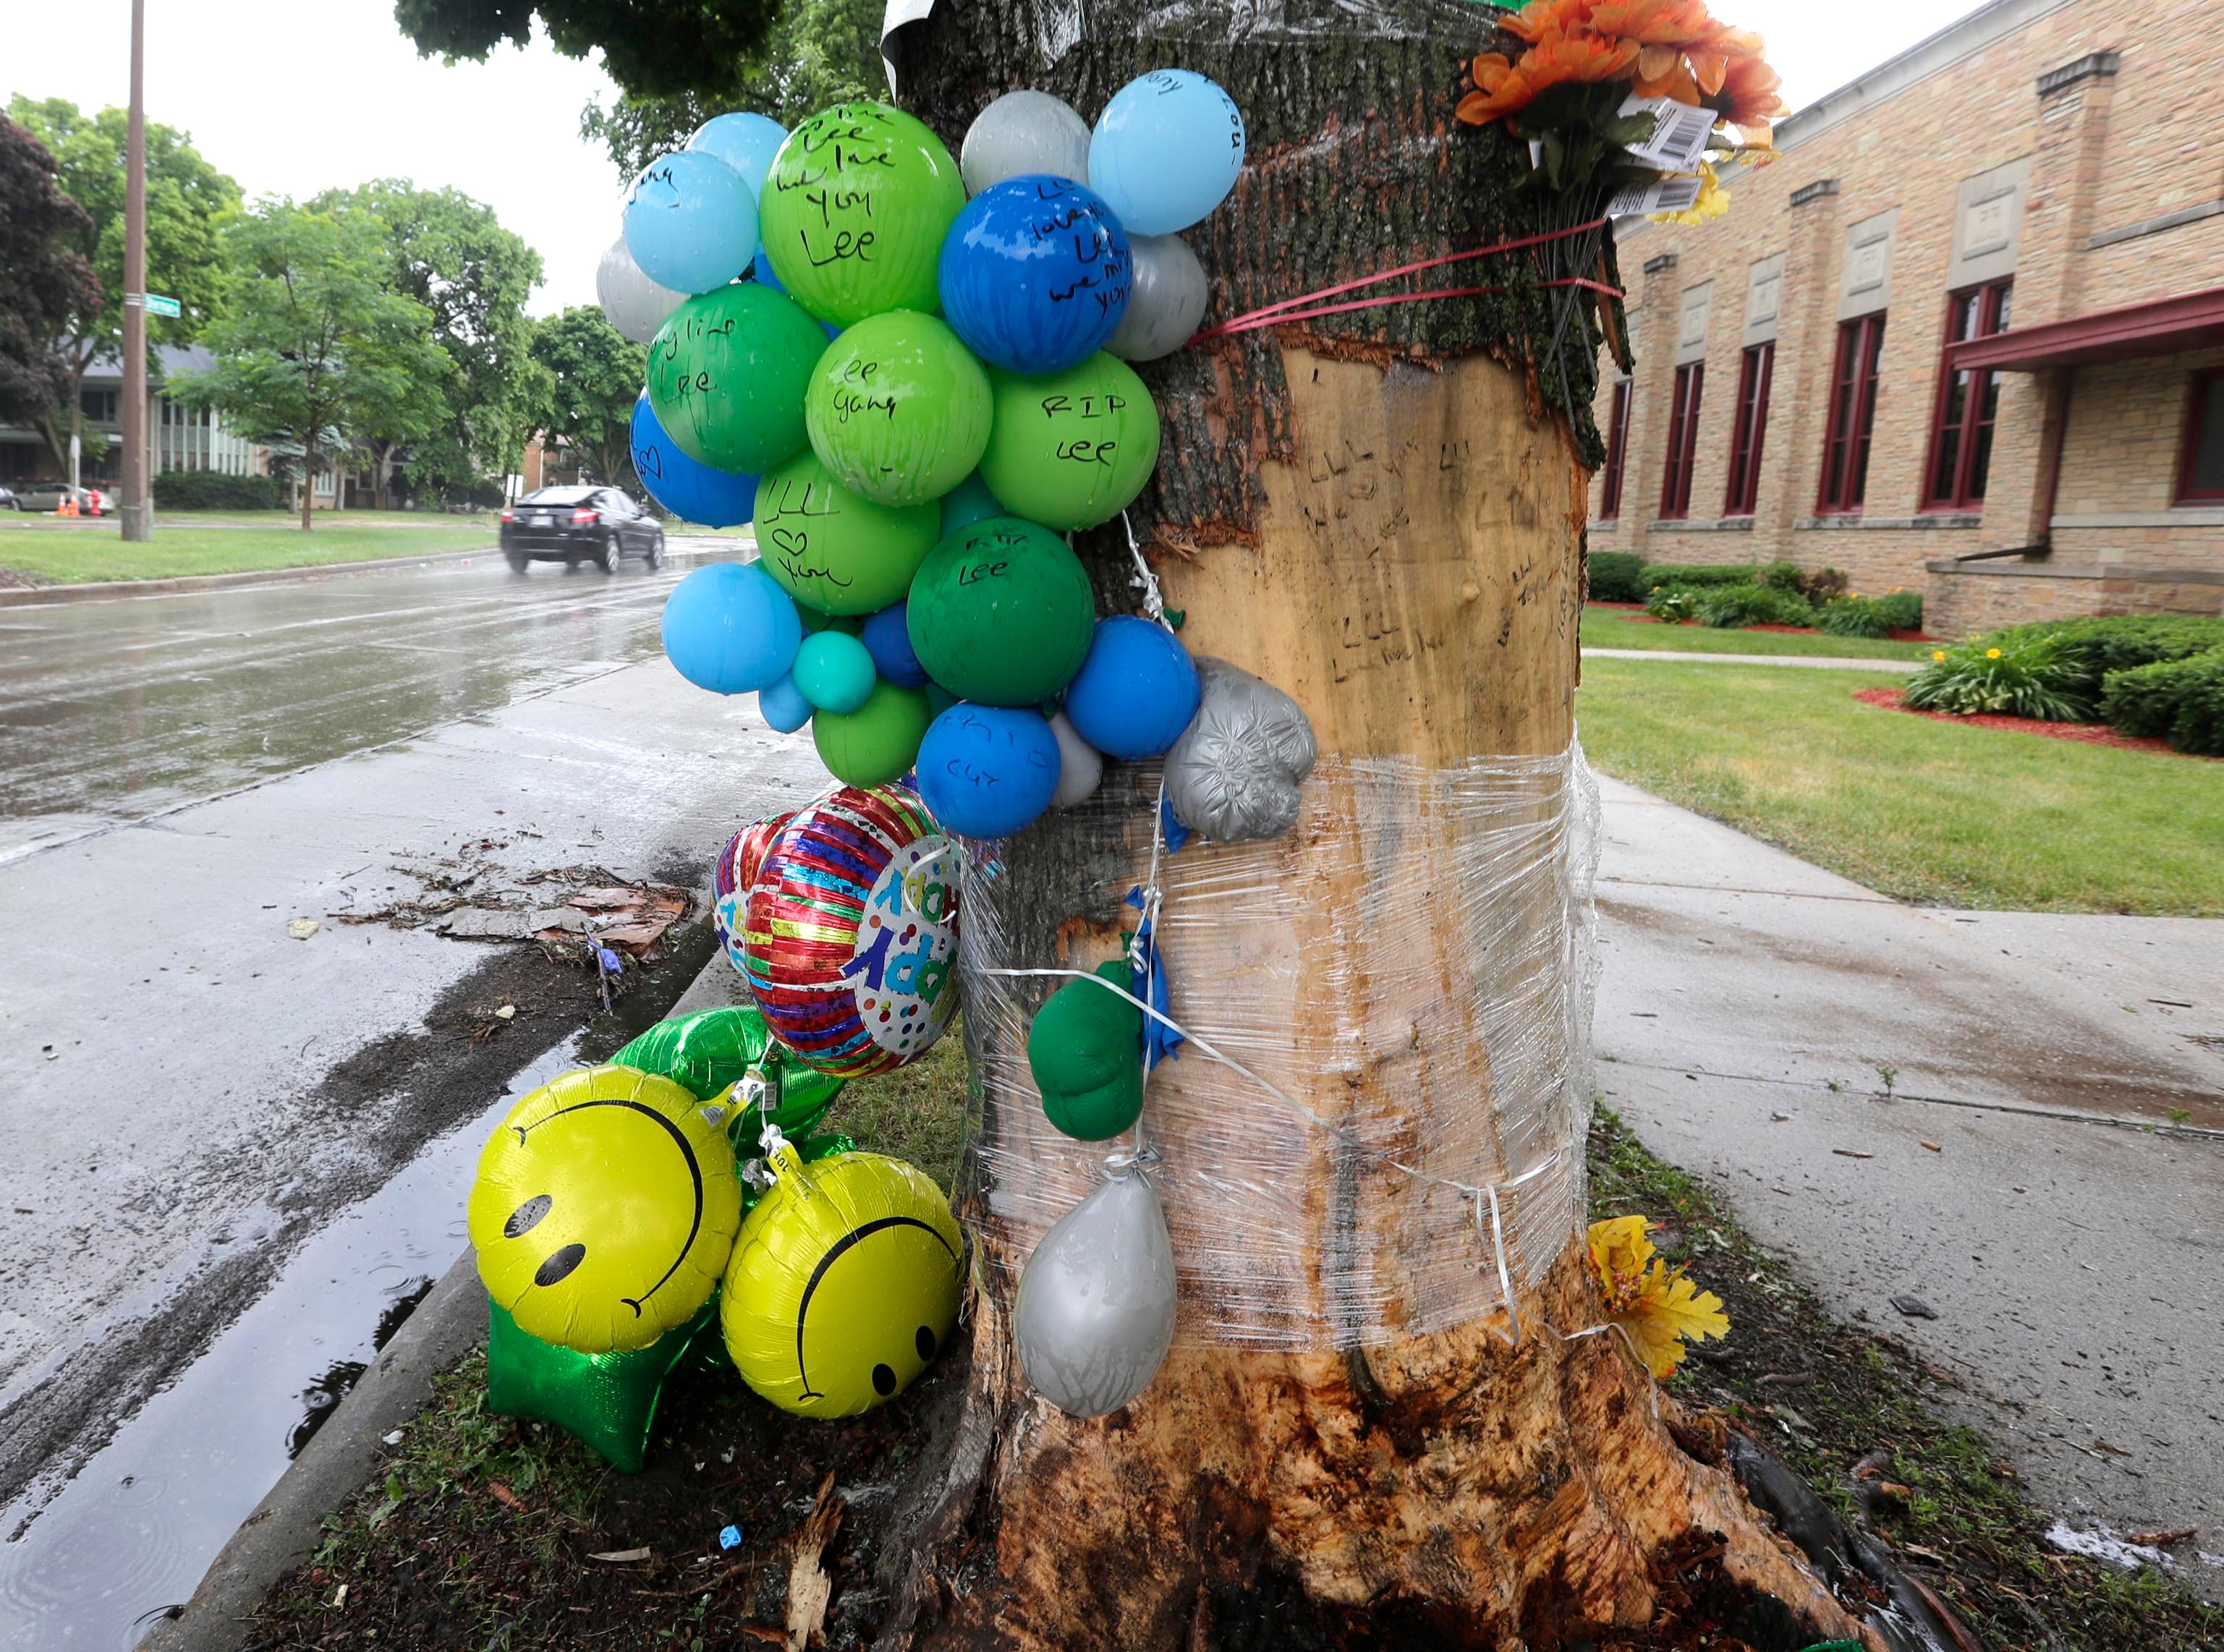 A memorial is seen on a tree where a 34-year-old woman died when the vehicle she was in lost control and hit a tree in the 3700 block of North Sherman Boulevard.